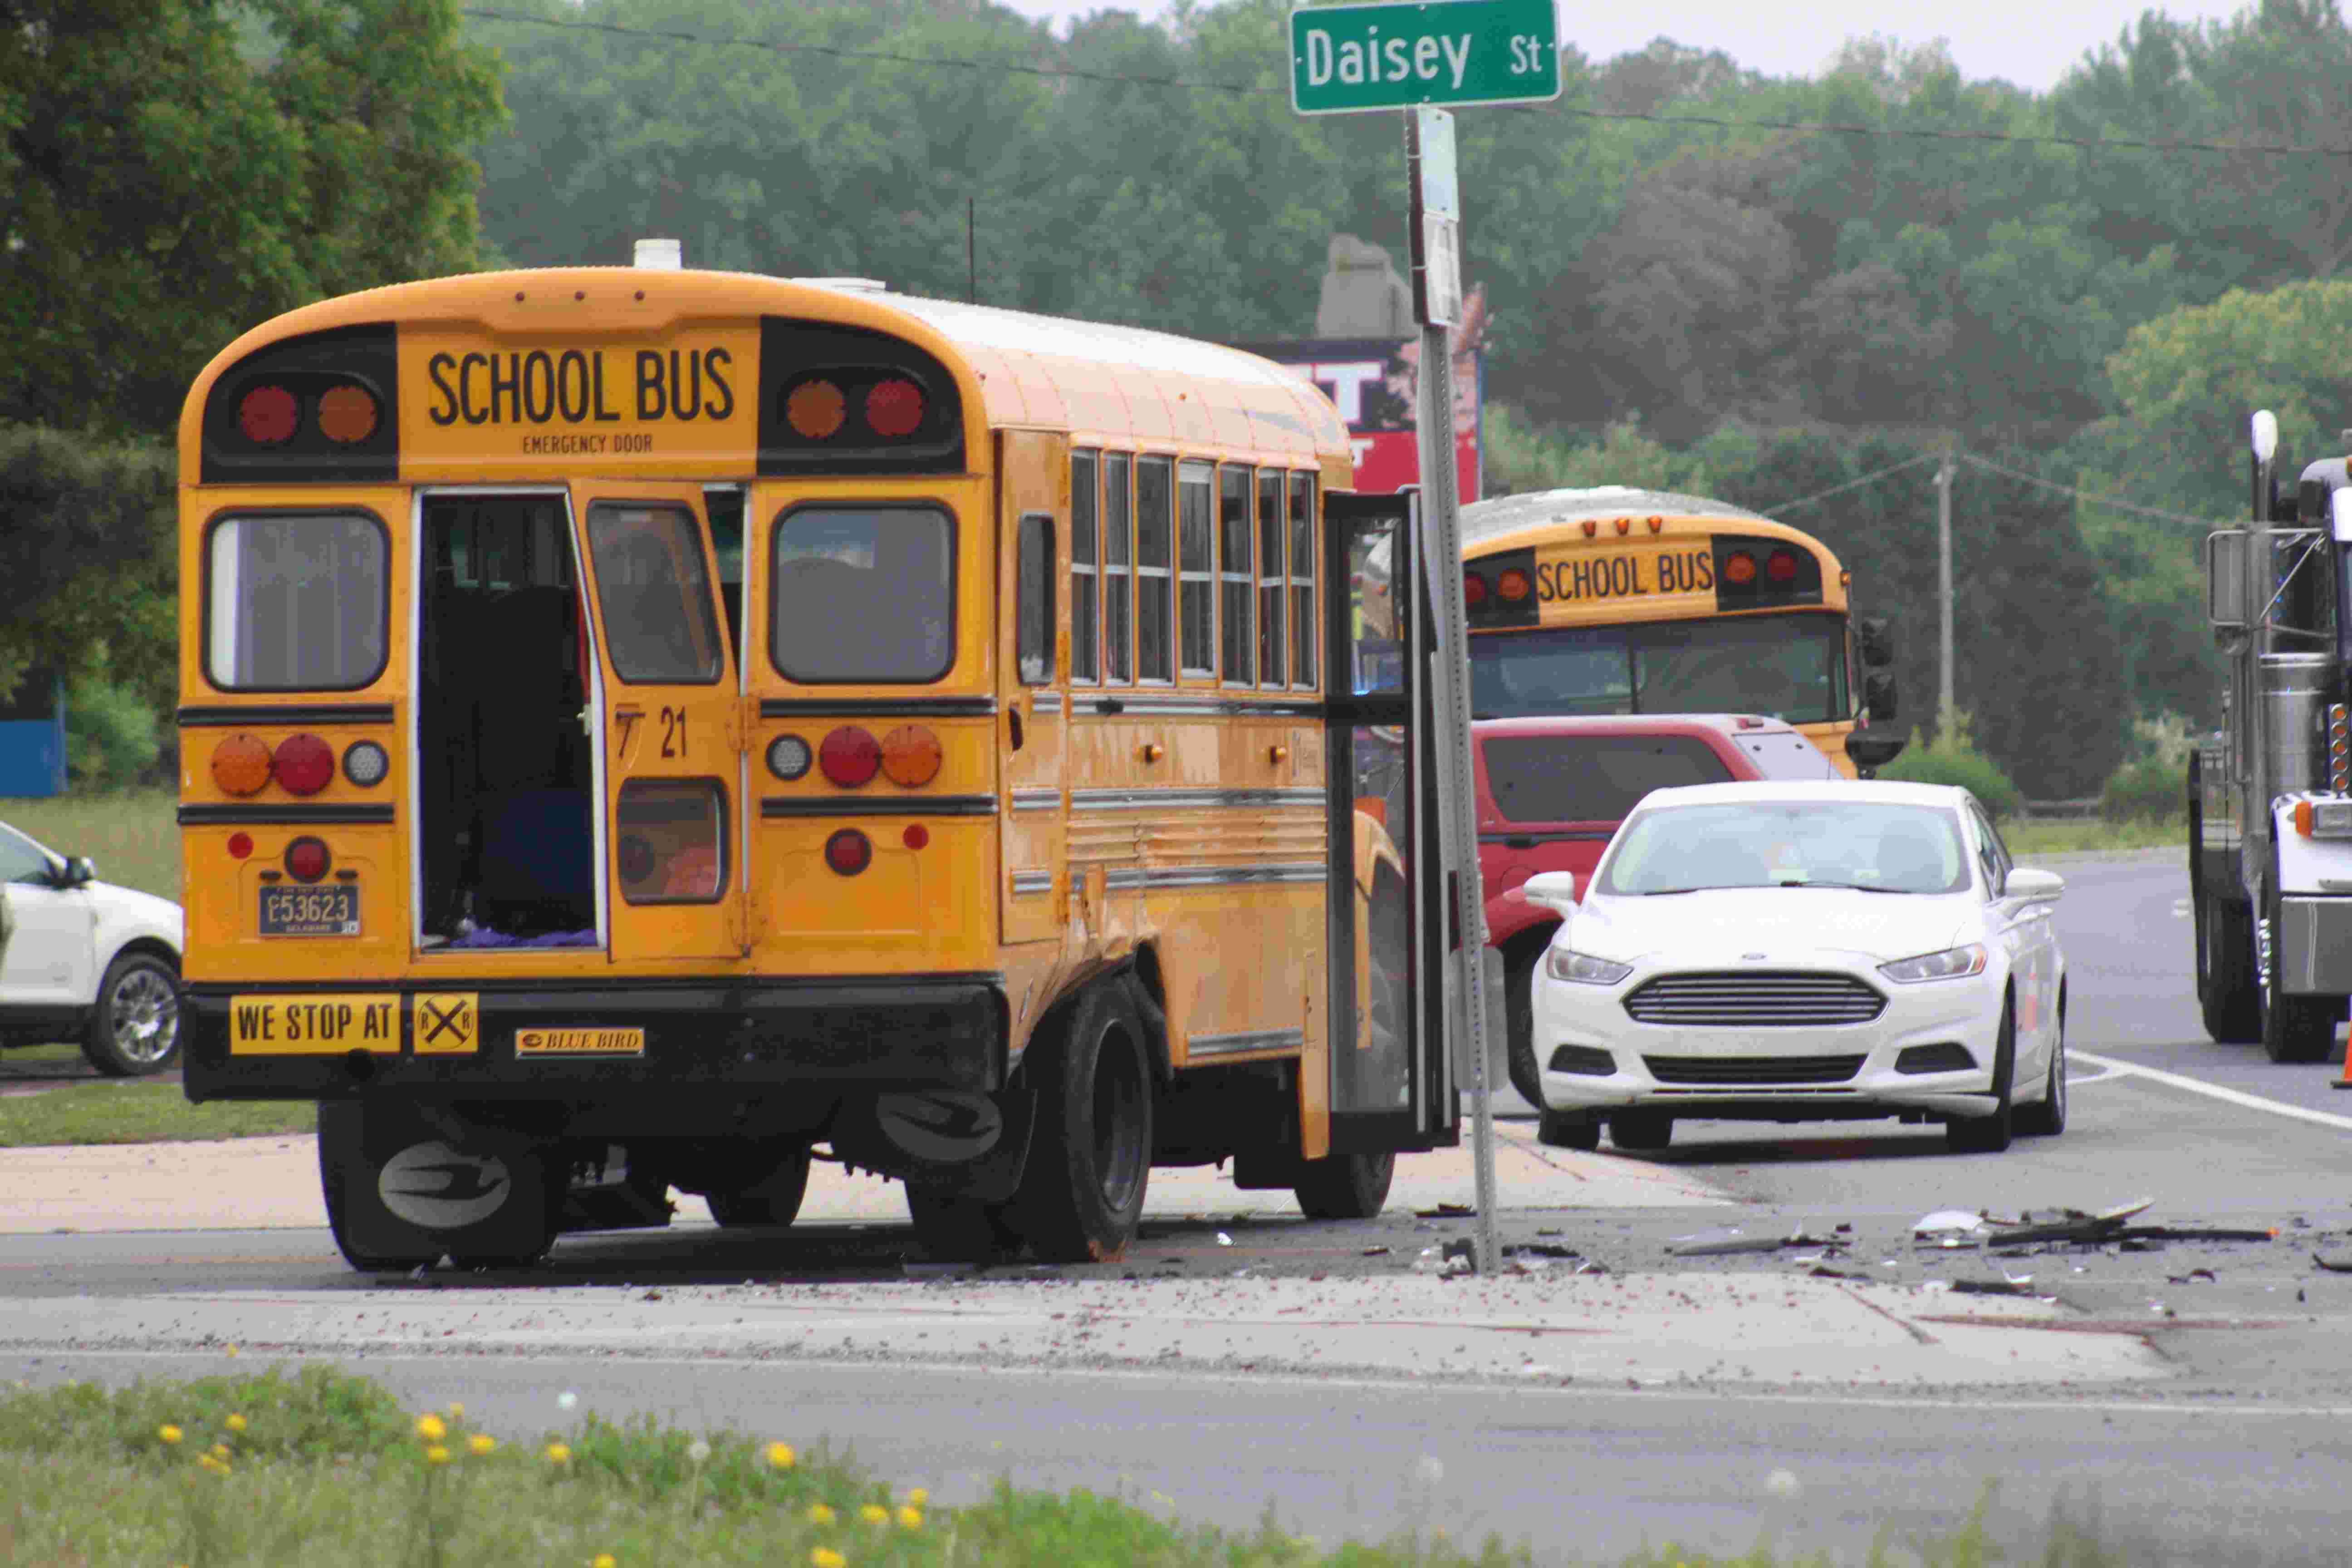 Aide killed in school bus crash on Route 113